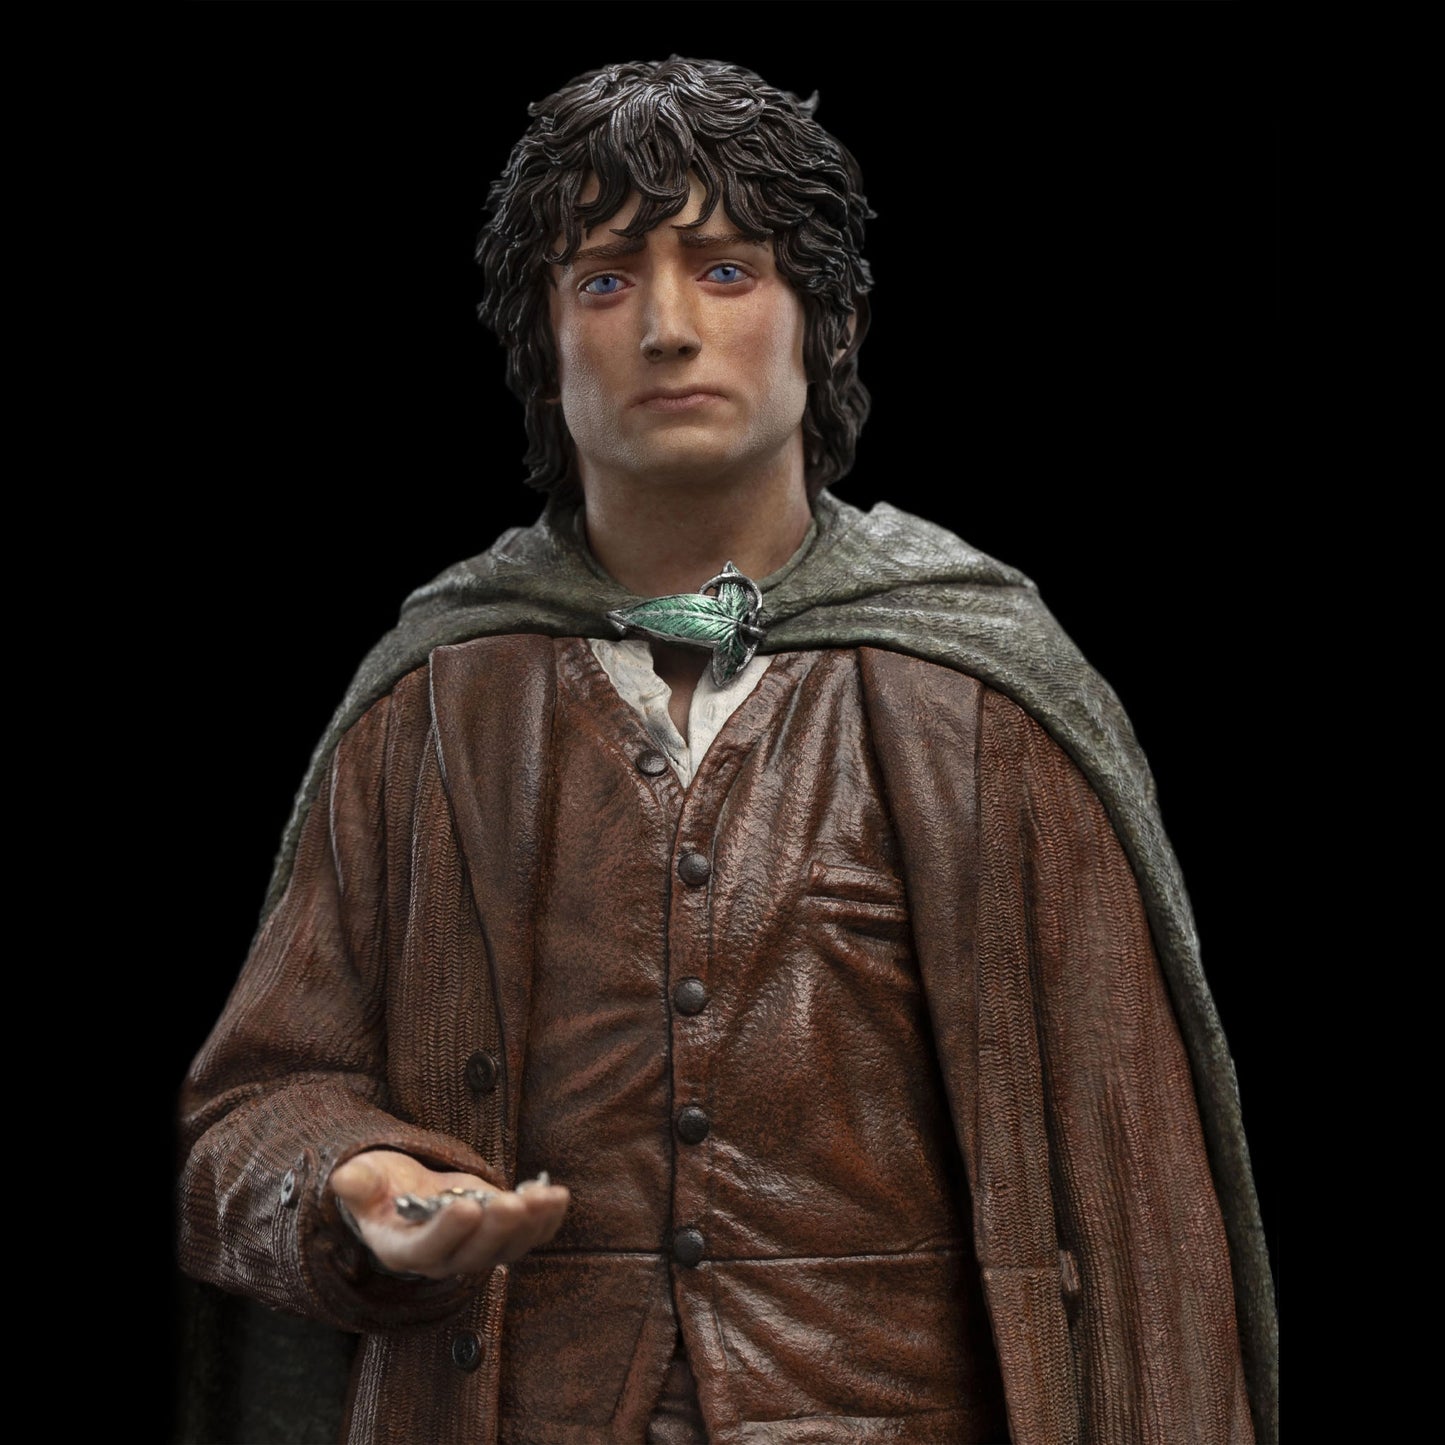 Frodo Baggins, Ringbearer (Lord of the Rings) 1:6 Scale Statue by Weta Workshop